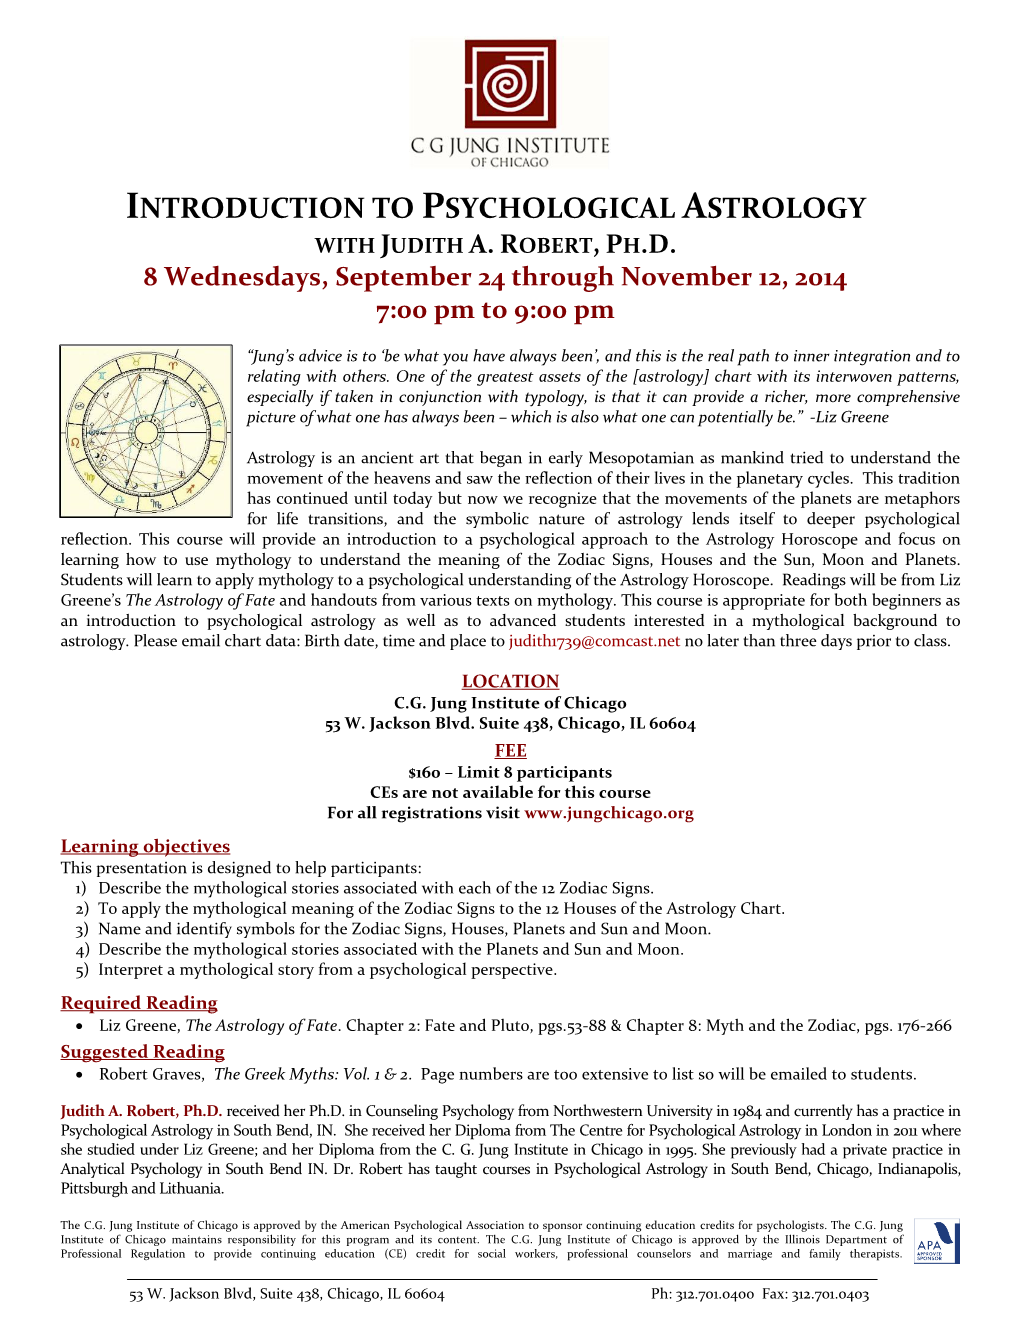 Introduction to Psychological Astrology with Judith A